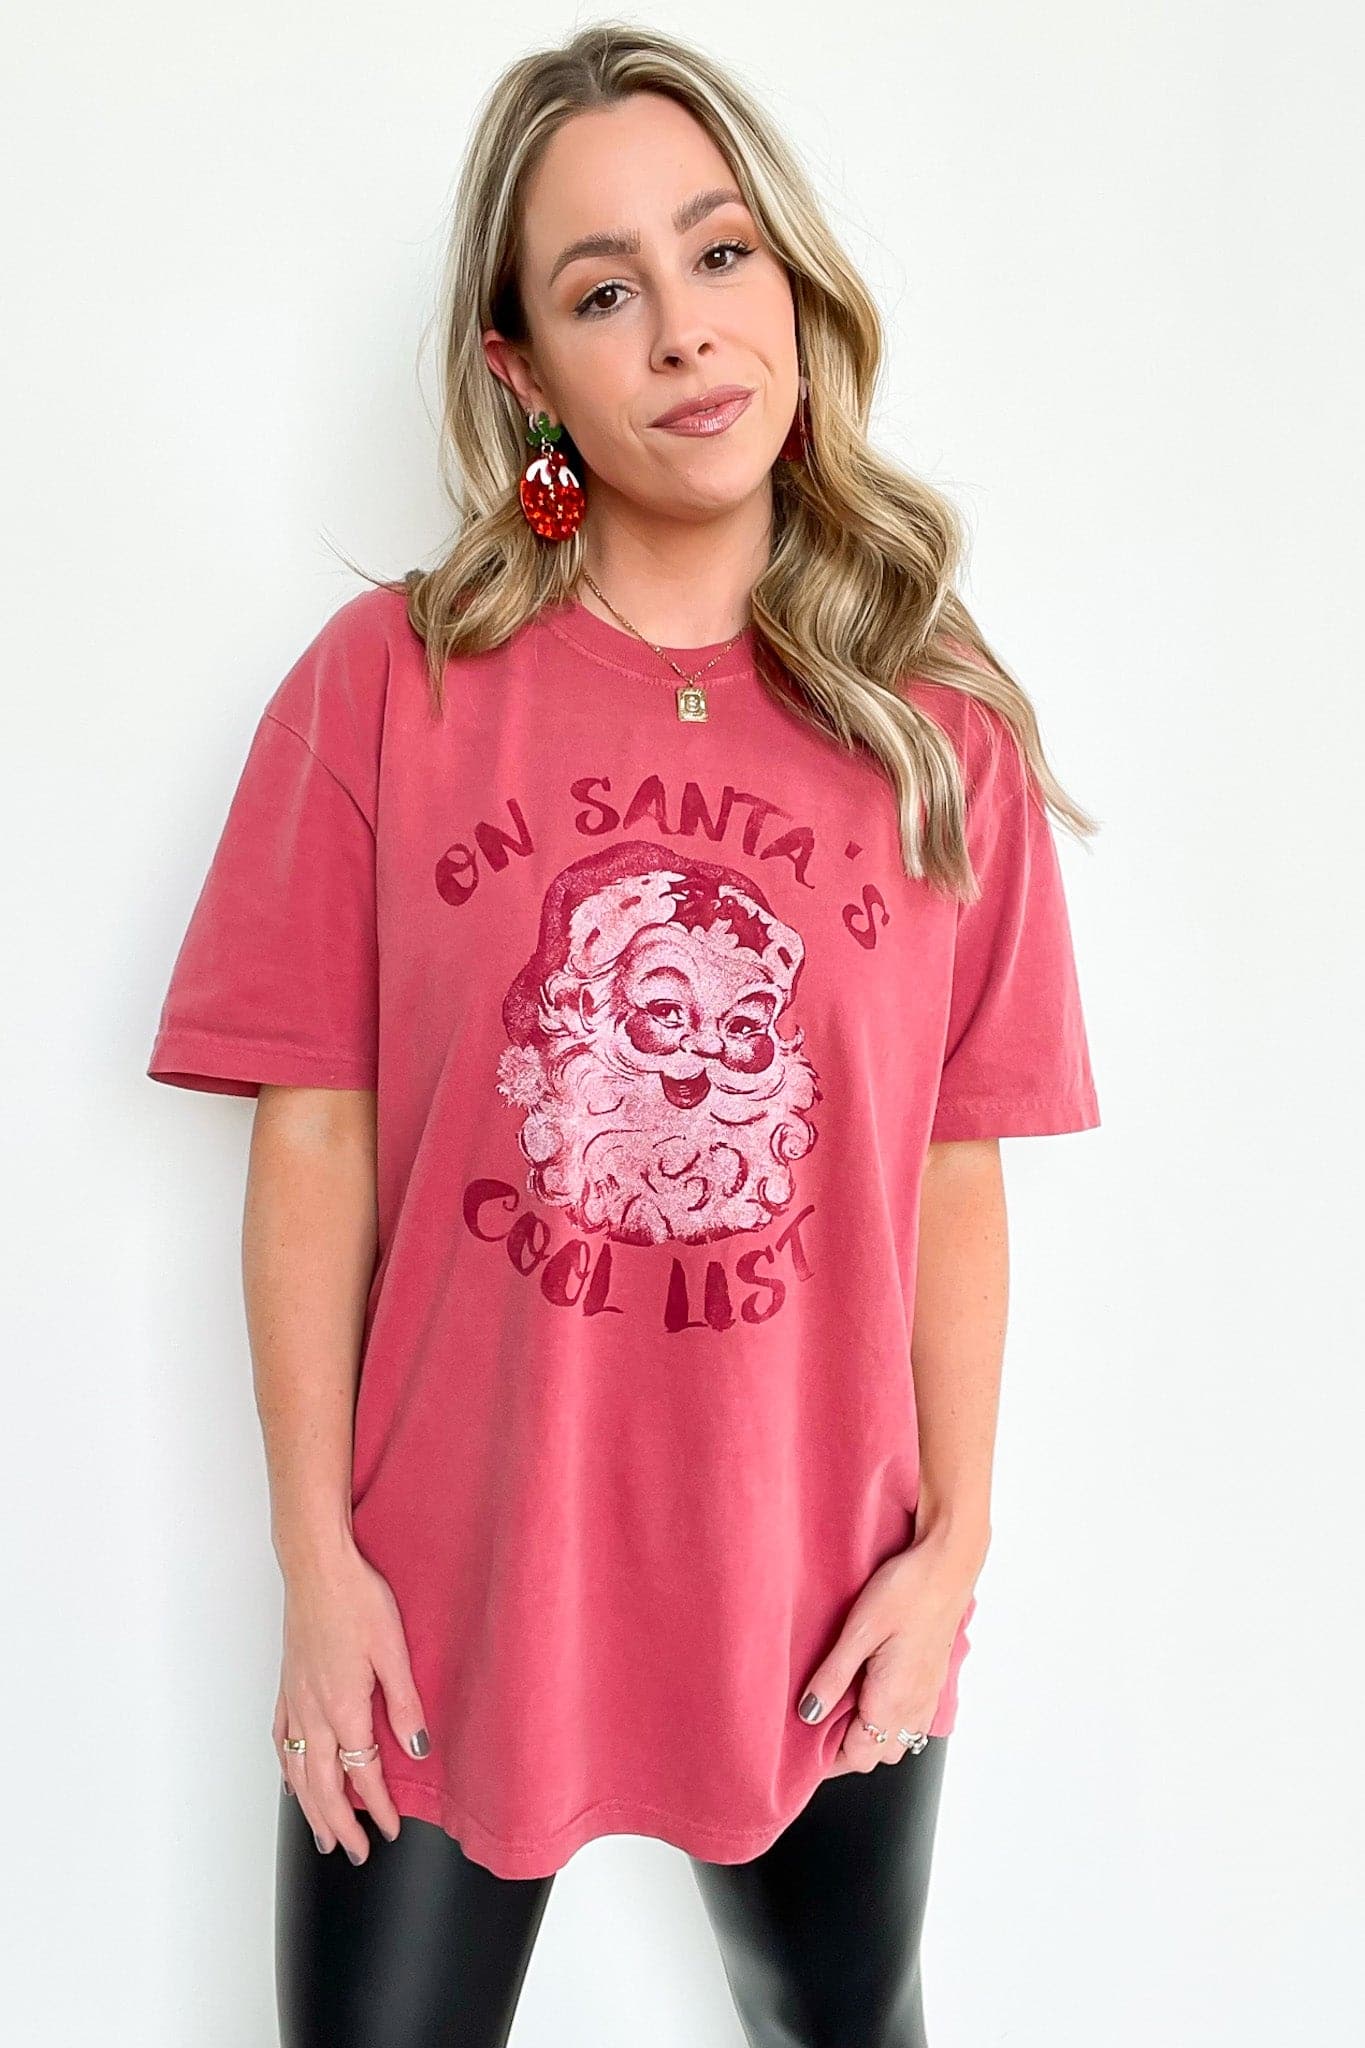  On Santa's Cool List Graphic Tee - FINAL SALE - Madison and Mallory